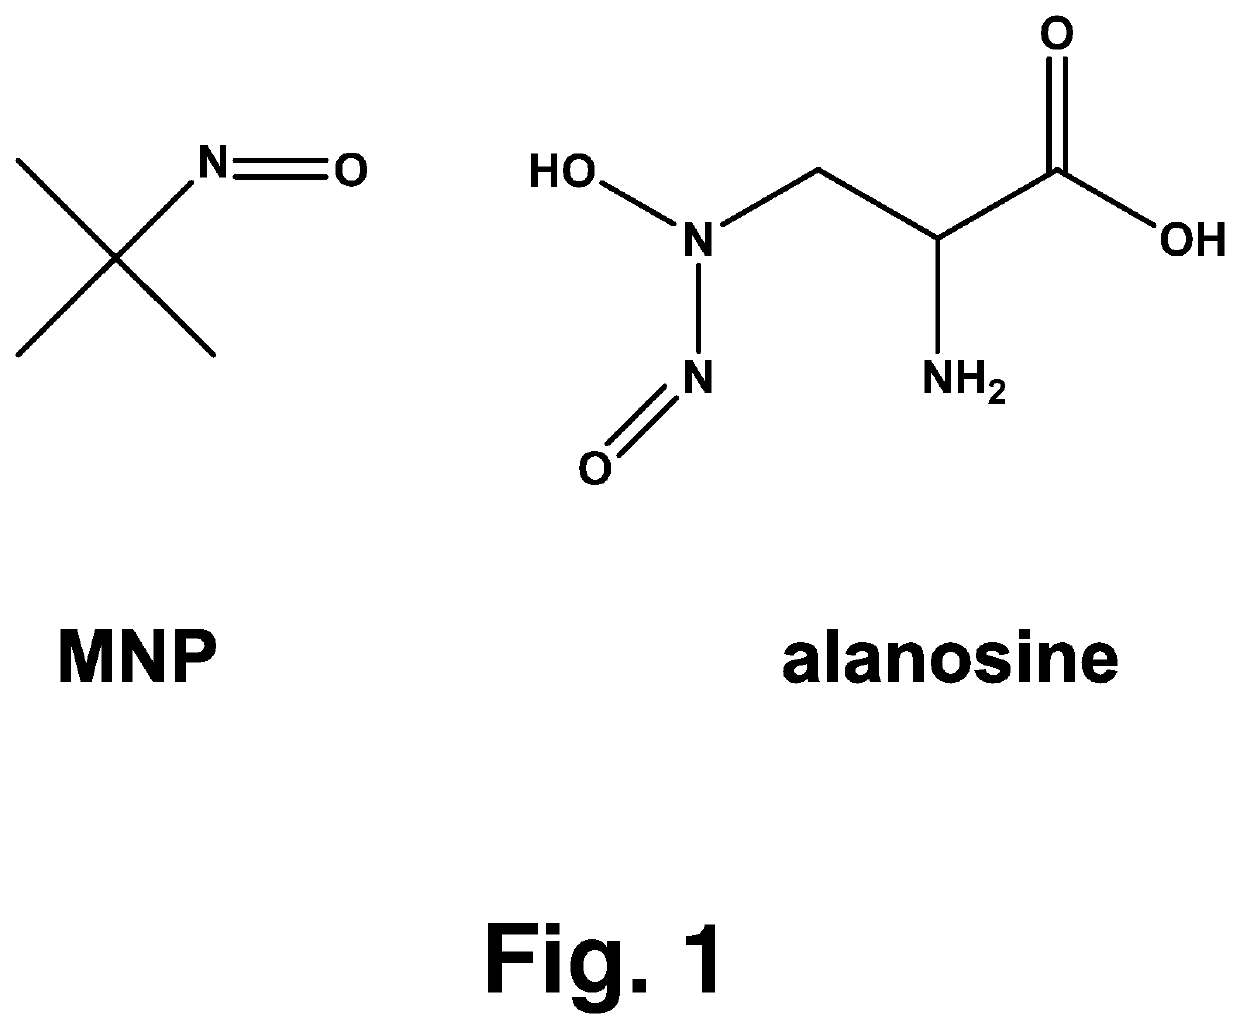 Photosensitized release of nitric oxide